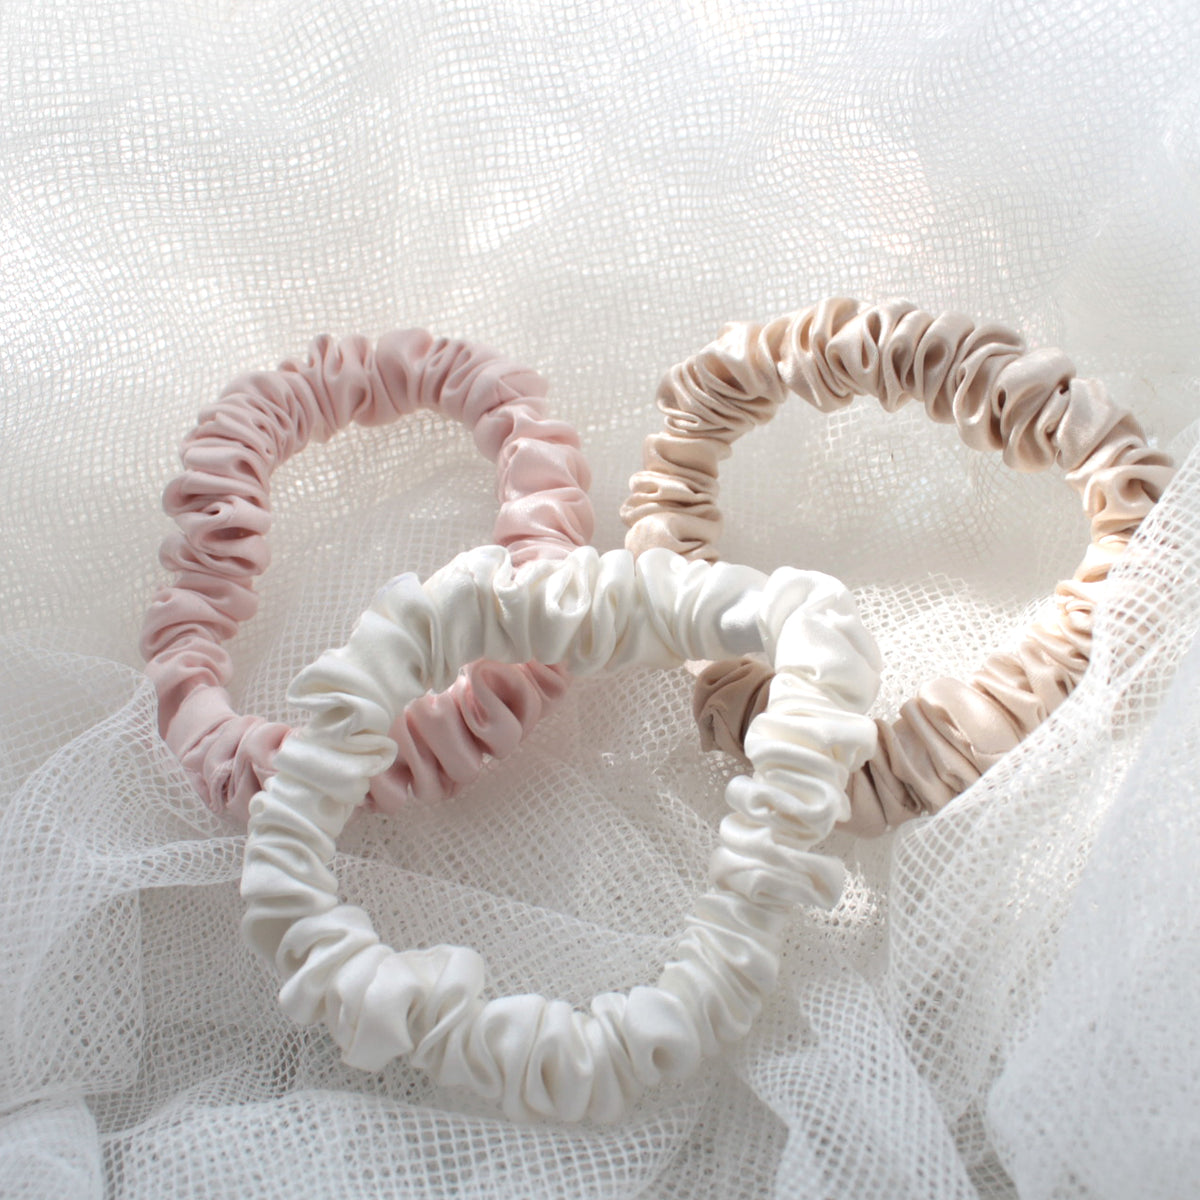 Mulberry Park Silks Doorbuster: Small Scrunchie Set - Ivory, Pink, Sand Skinny Bridesmaid Gifts